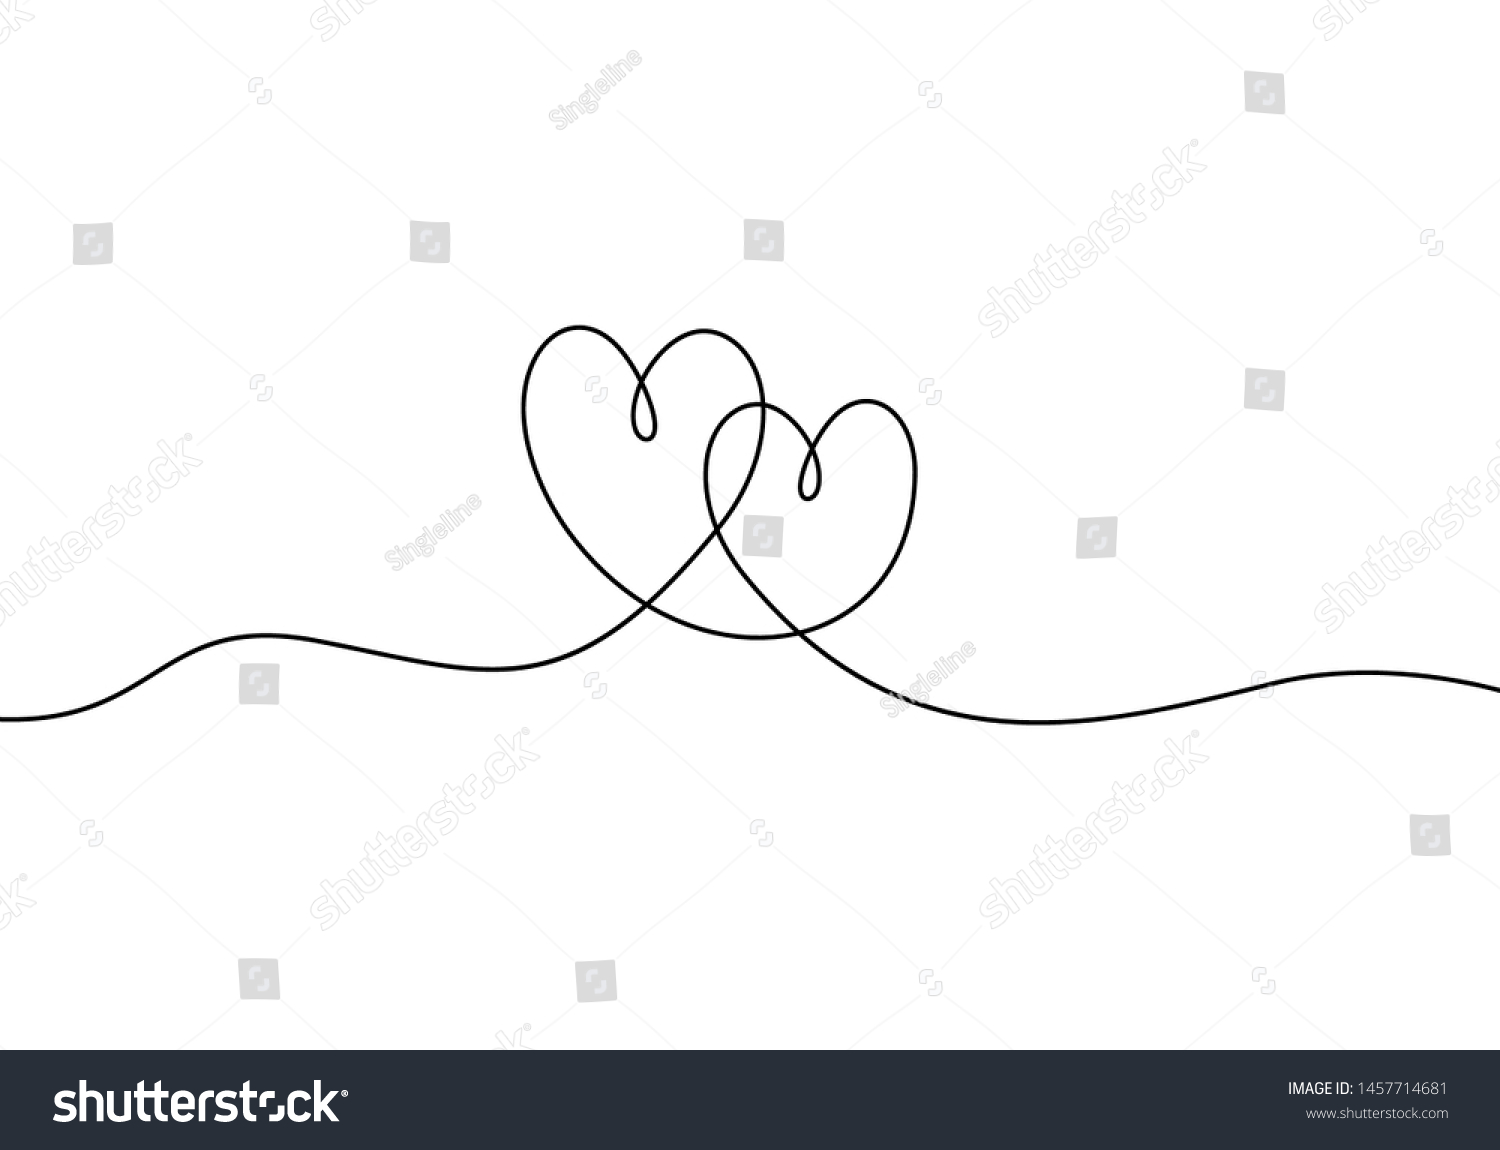 Continuous line drawing of love sign with two hearts embrace minimalism design on white background #1457714681